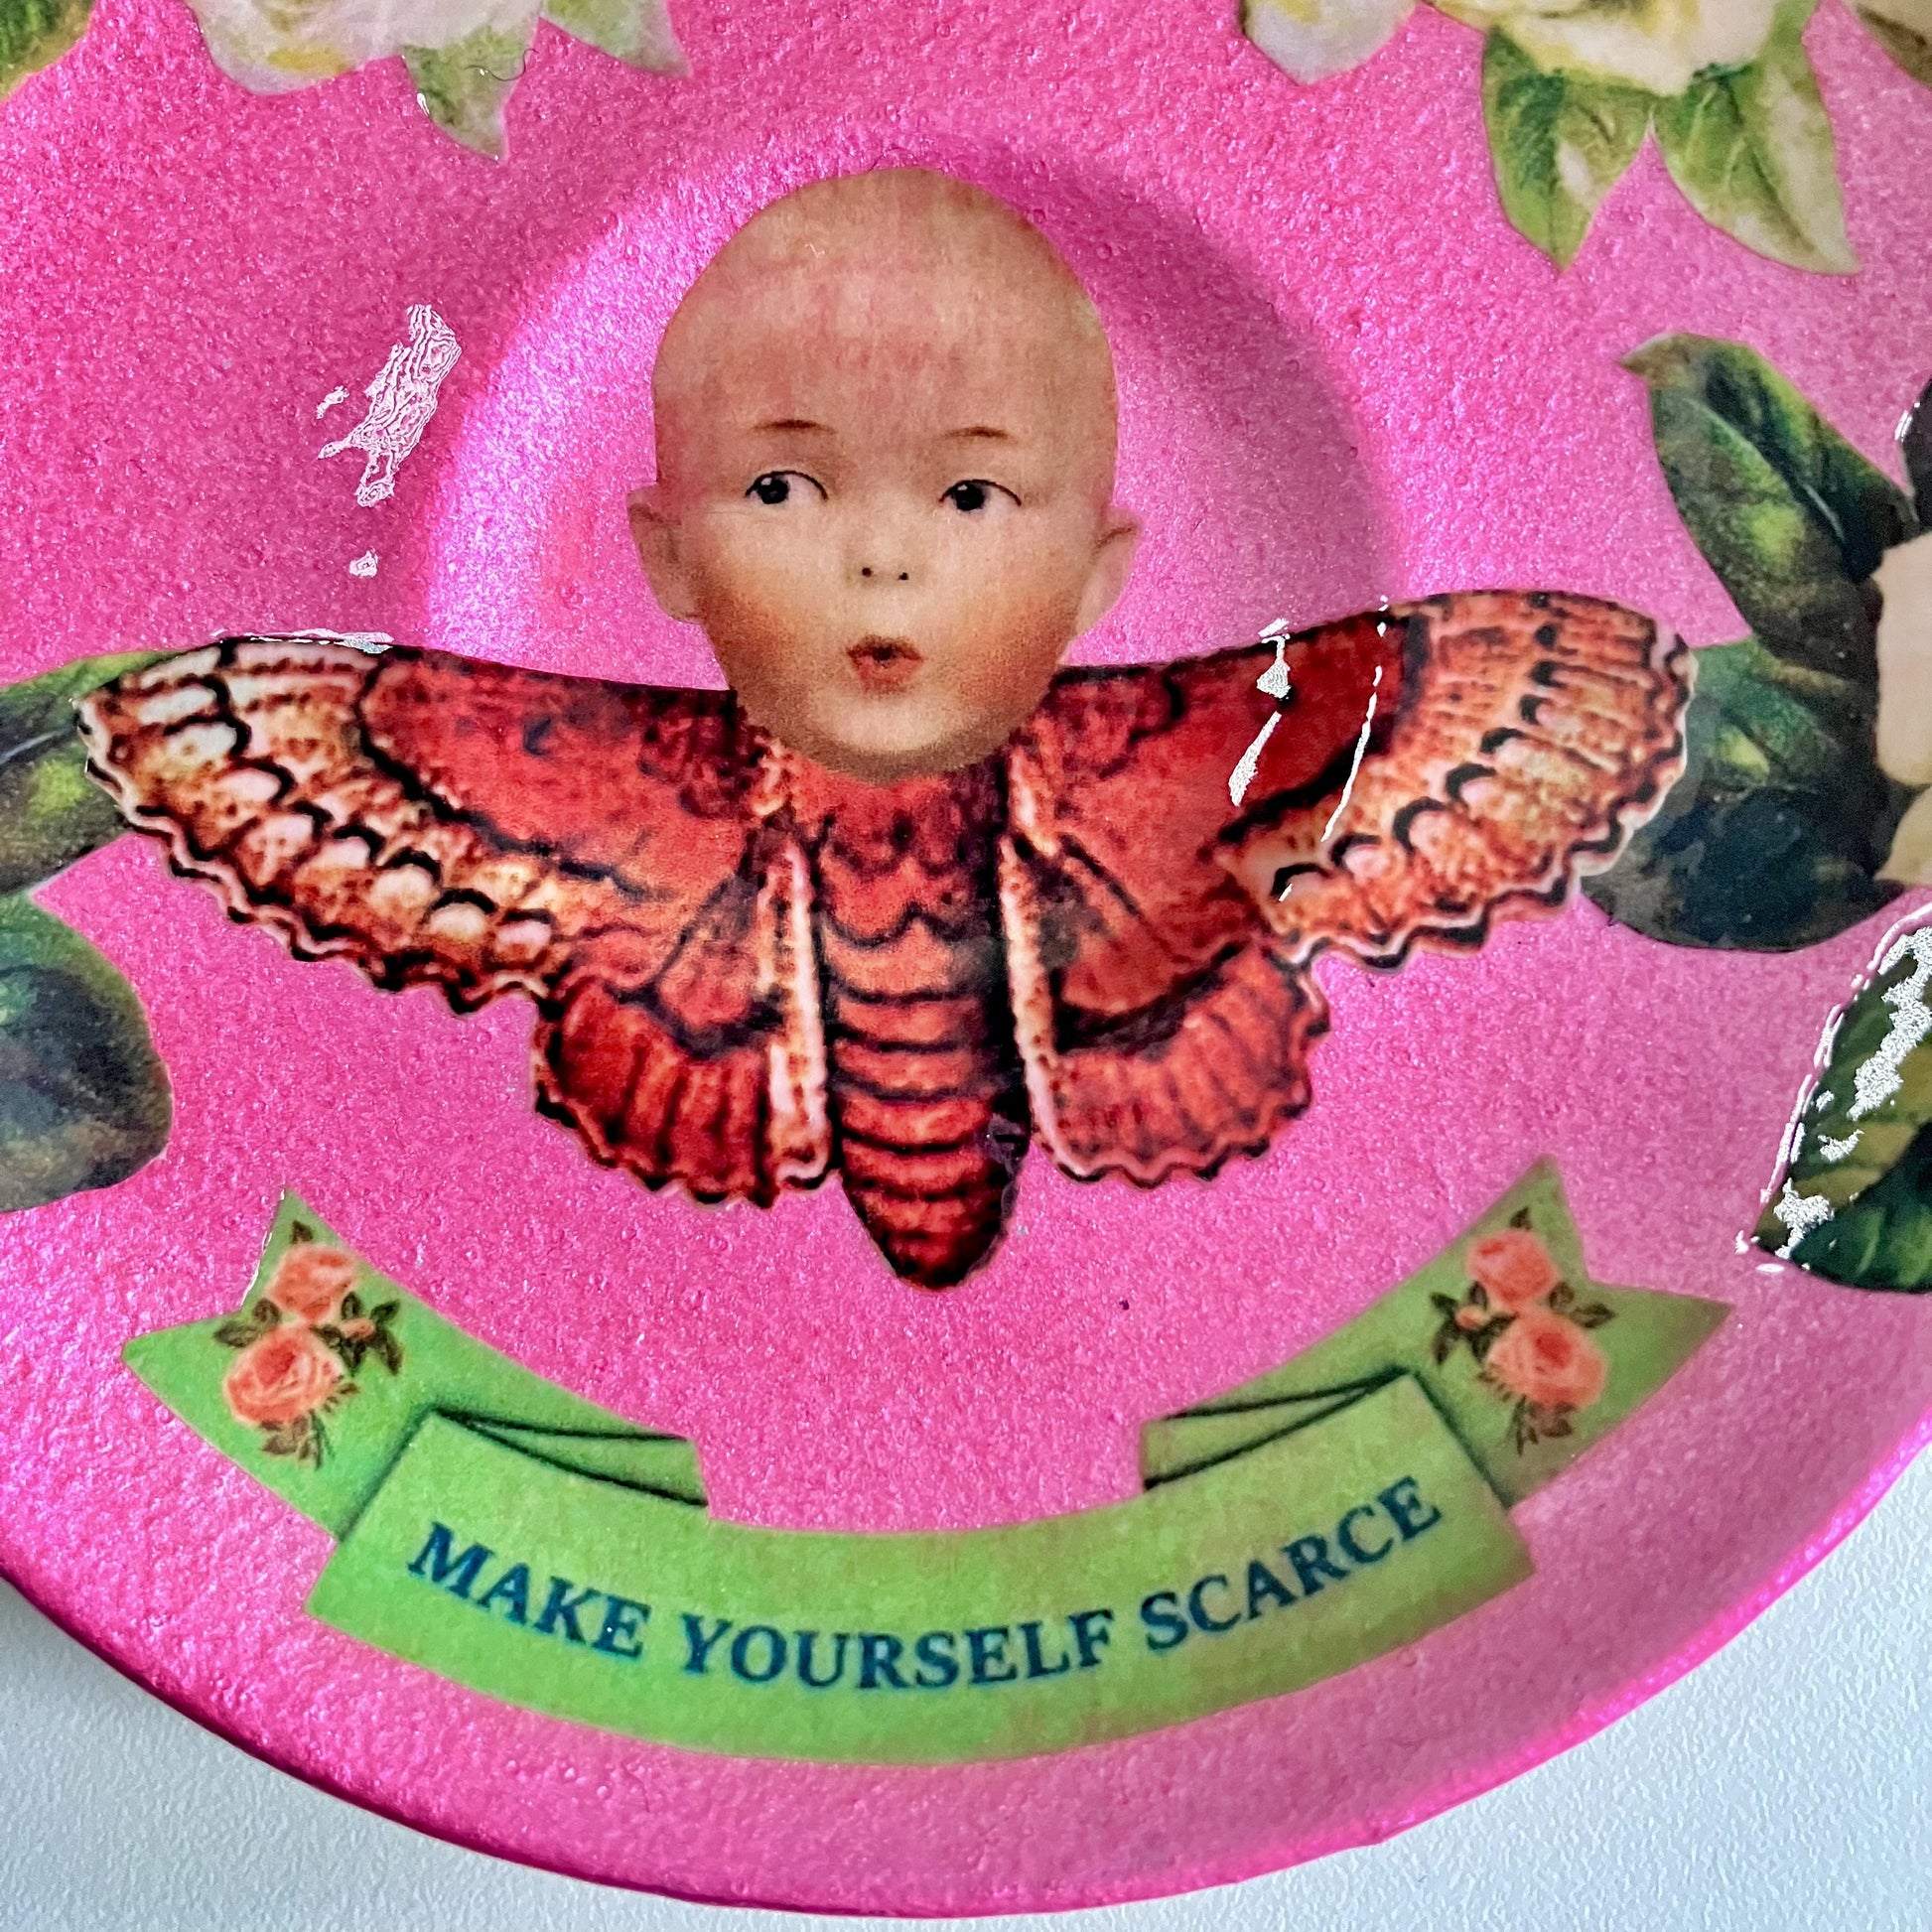 "Make Yourself Scarce" Trinket Dish by House of Frisson. Featuring a moth with doll head, framed by roses, on a pink background. Closeup detail showing a moth with doll head.